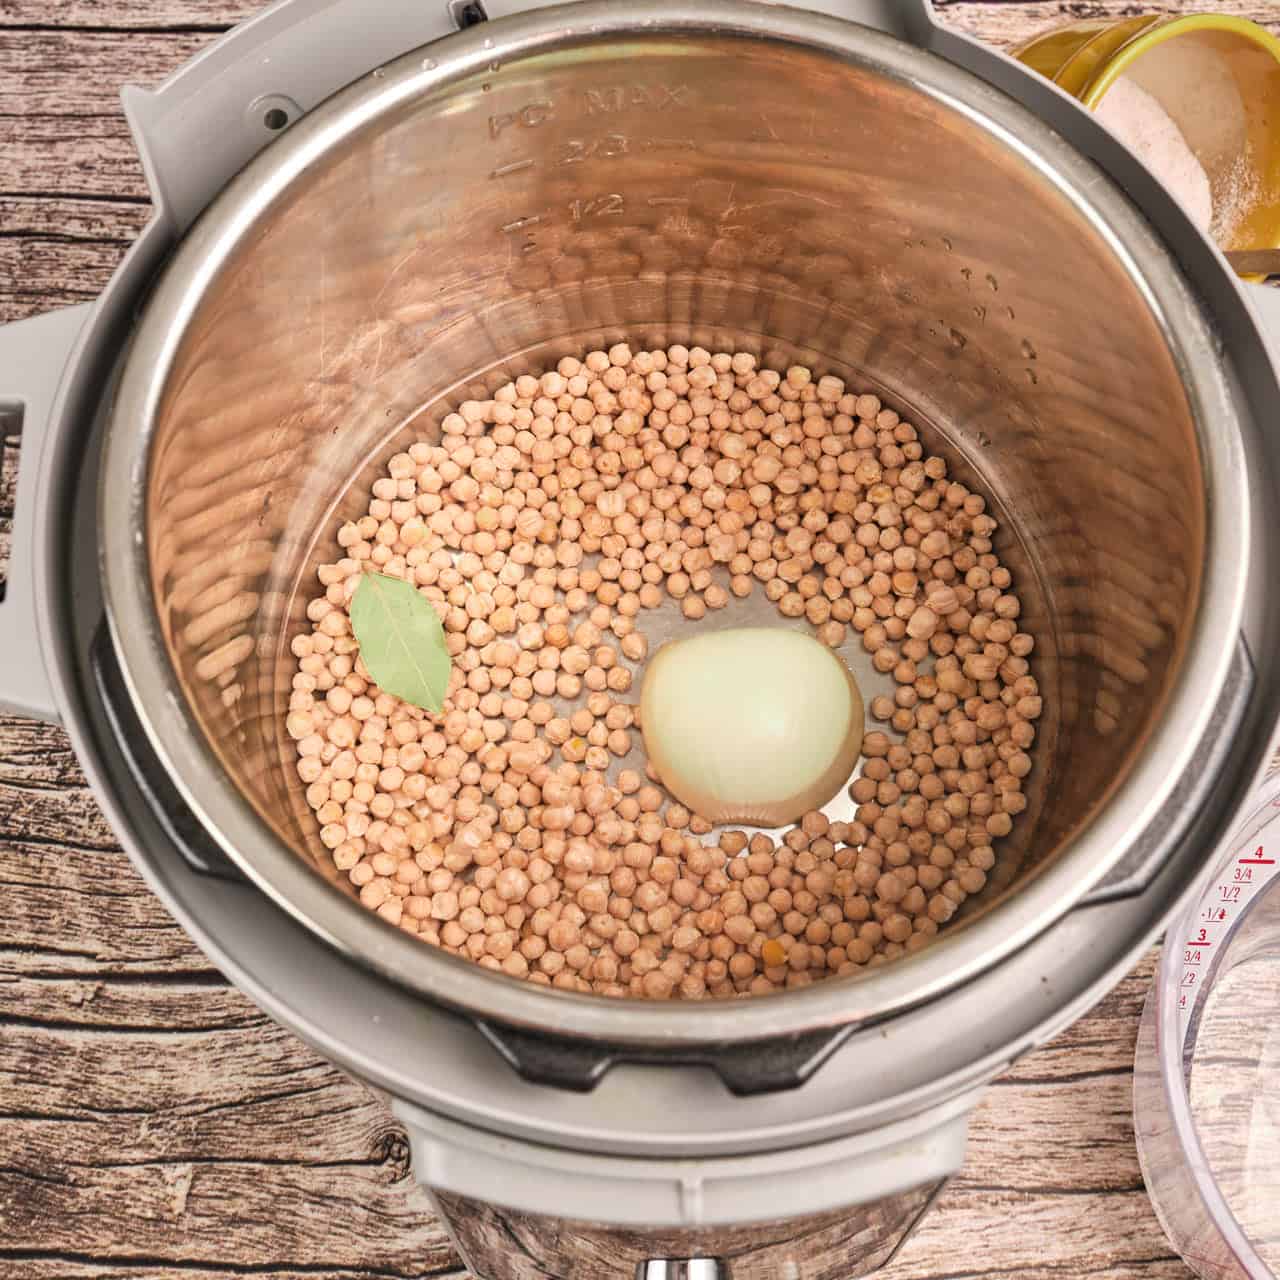 Small chickpeas, onion, and bay leaf in the Instant Pot